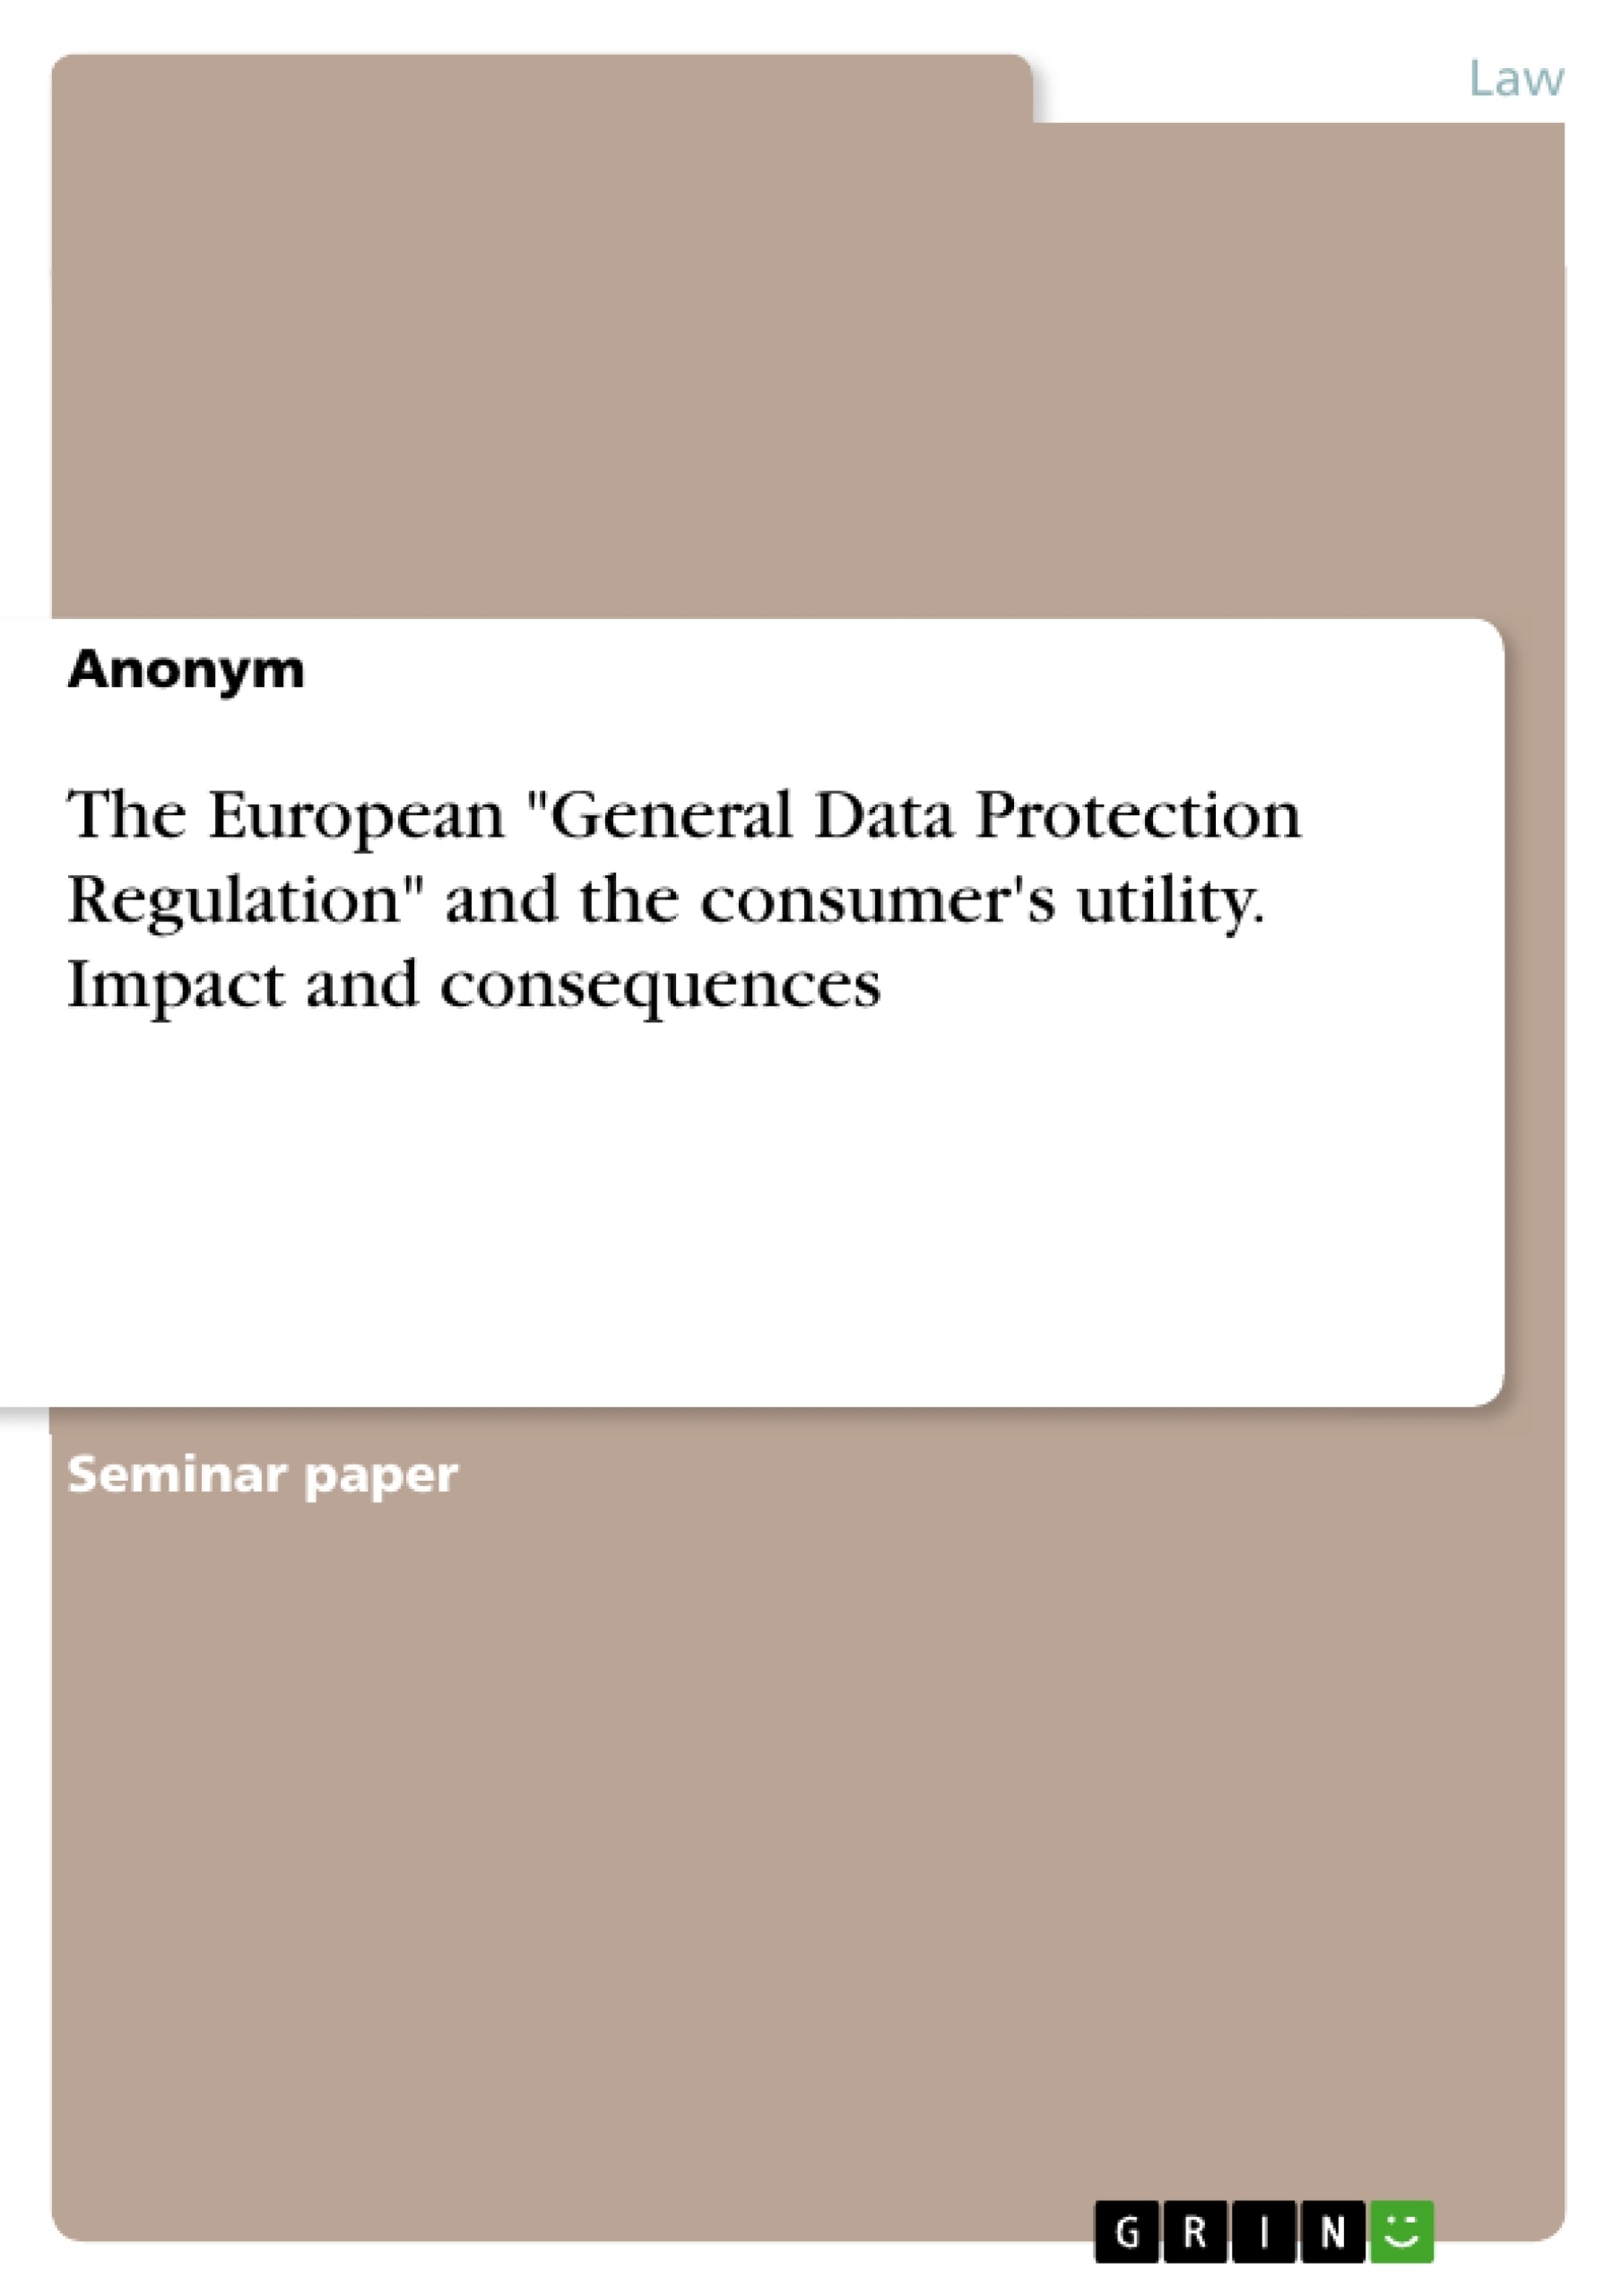 Title: The European "General Data Protection Regulation" and the consumer's utility. Impact and consequences